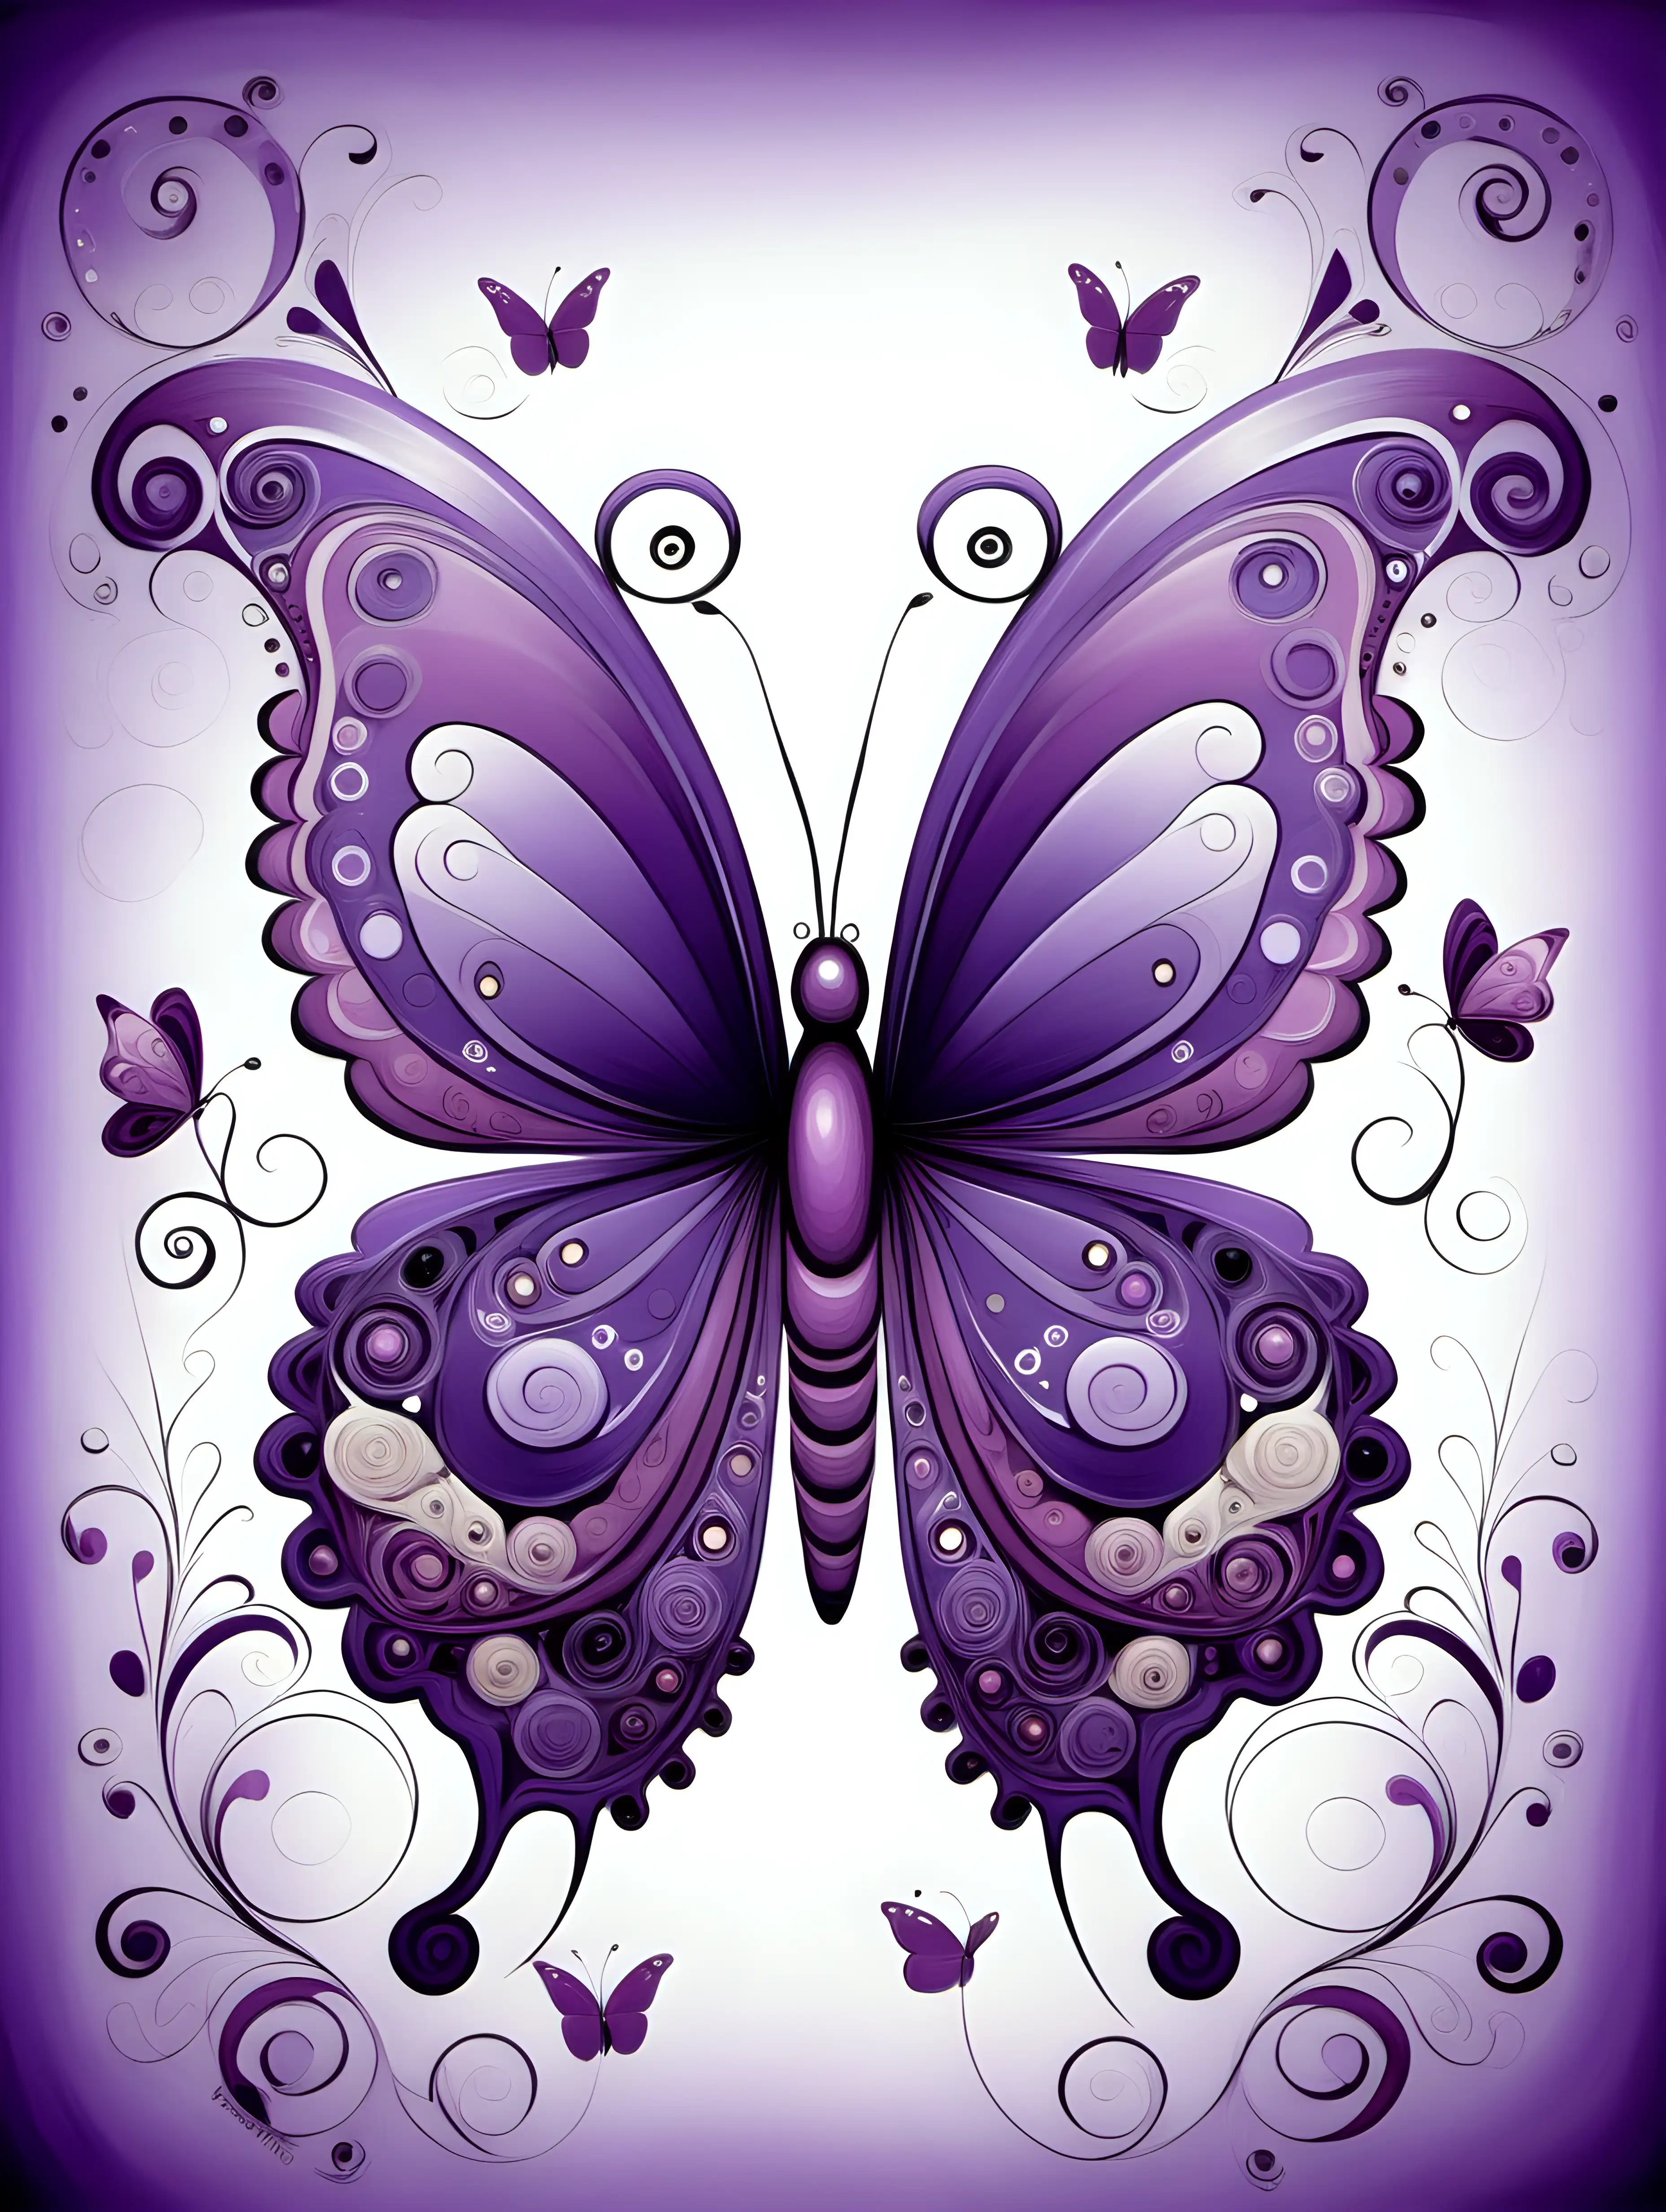 Whimsical butterfly in shades of purple